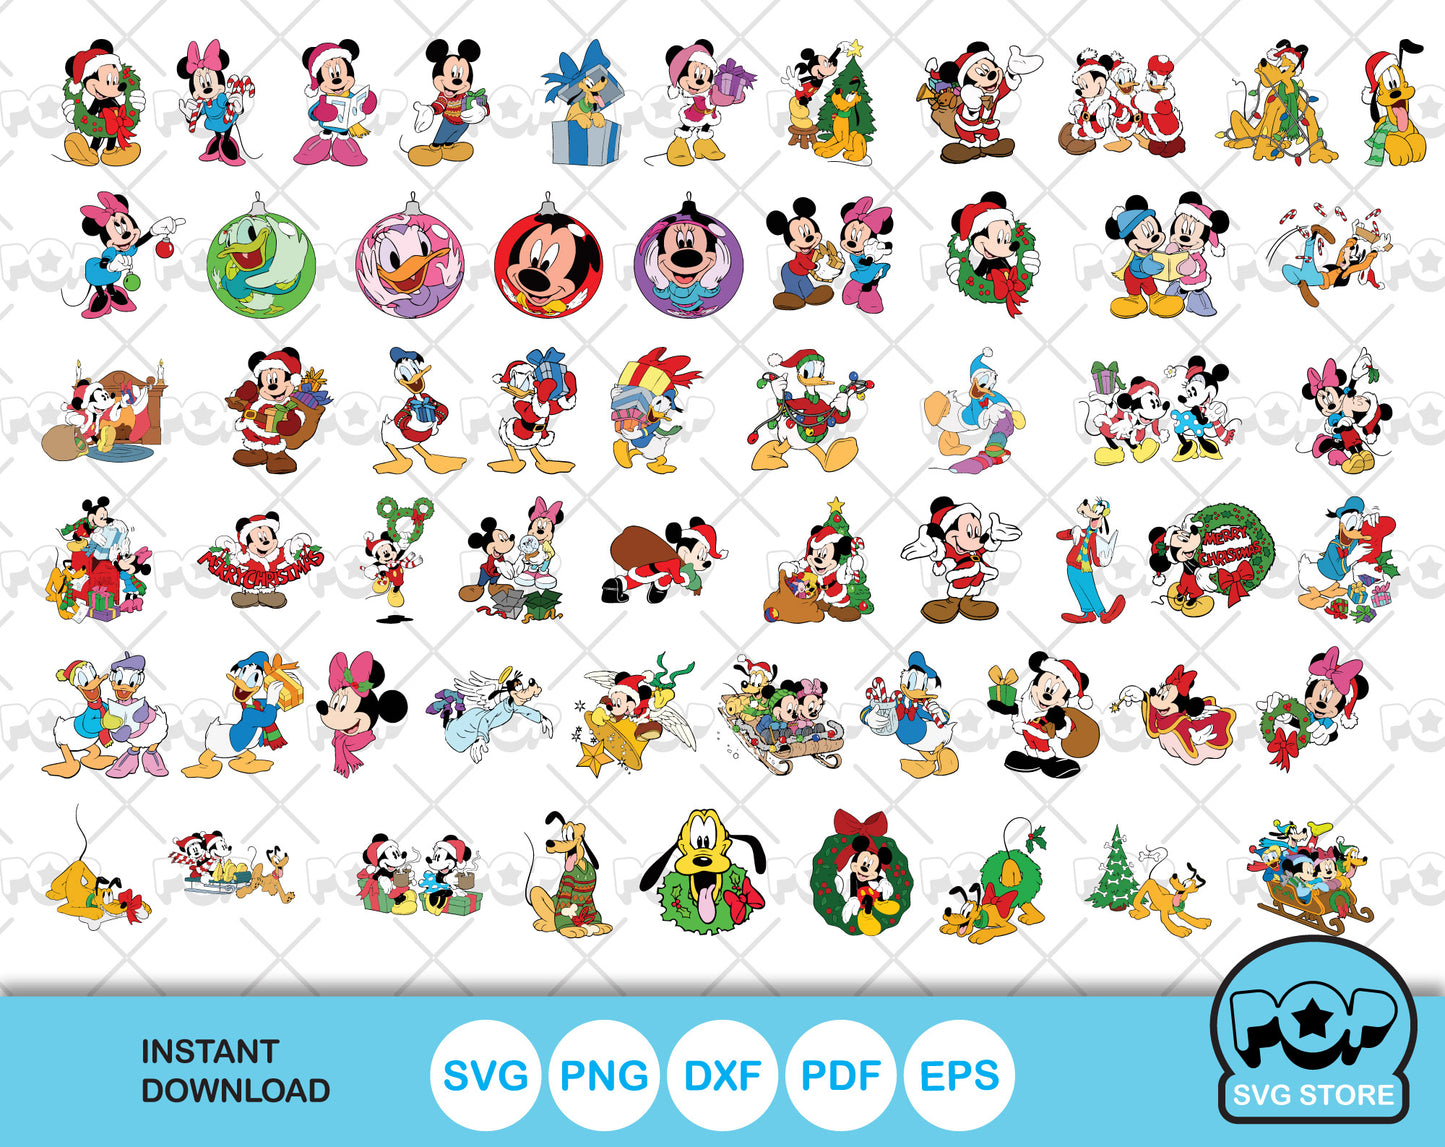 Disney Christmas 100+ cliparts bundle, Mickey and Friends Christmas cliparts, SVG cut files for cricut silhouette, SVG, PNG, DXF, instant download